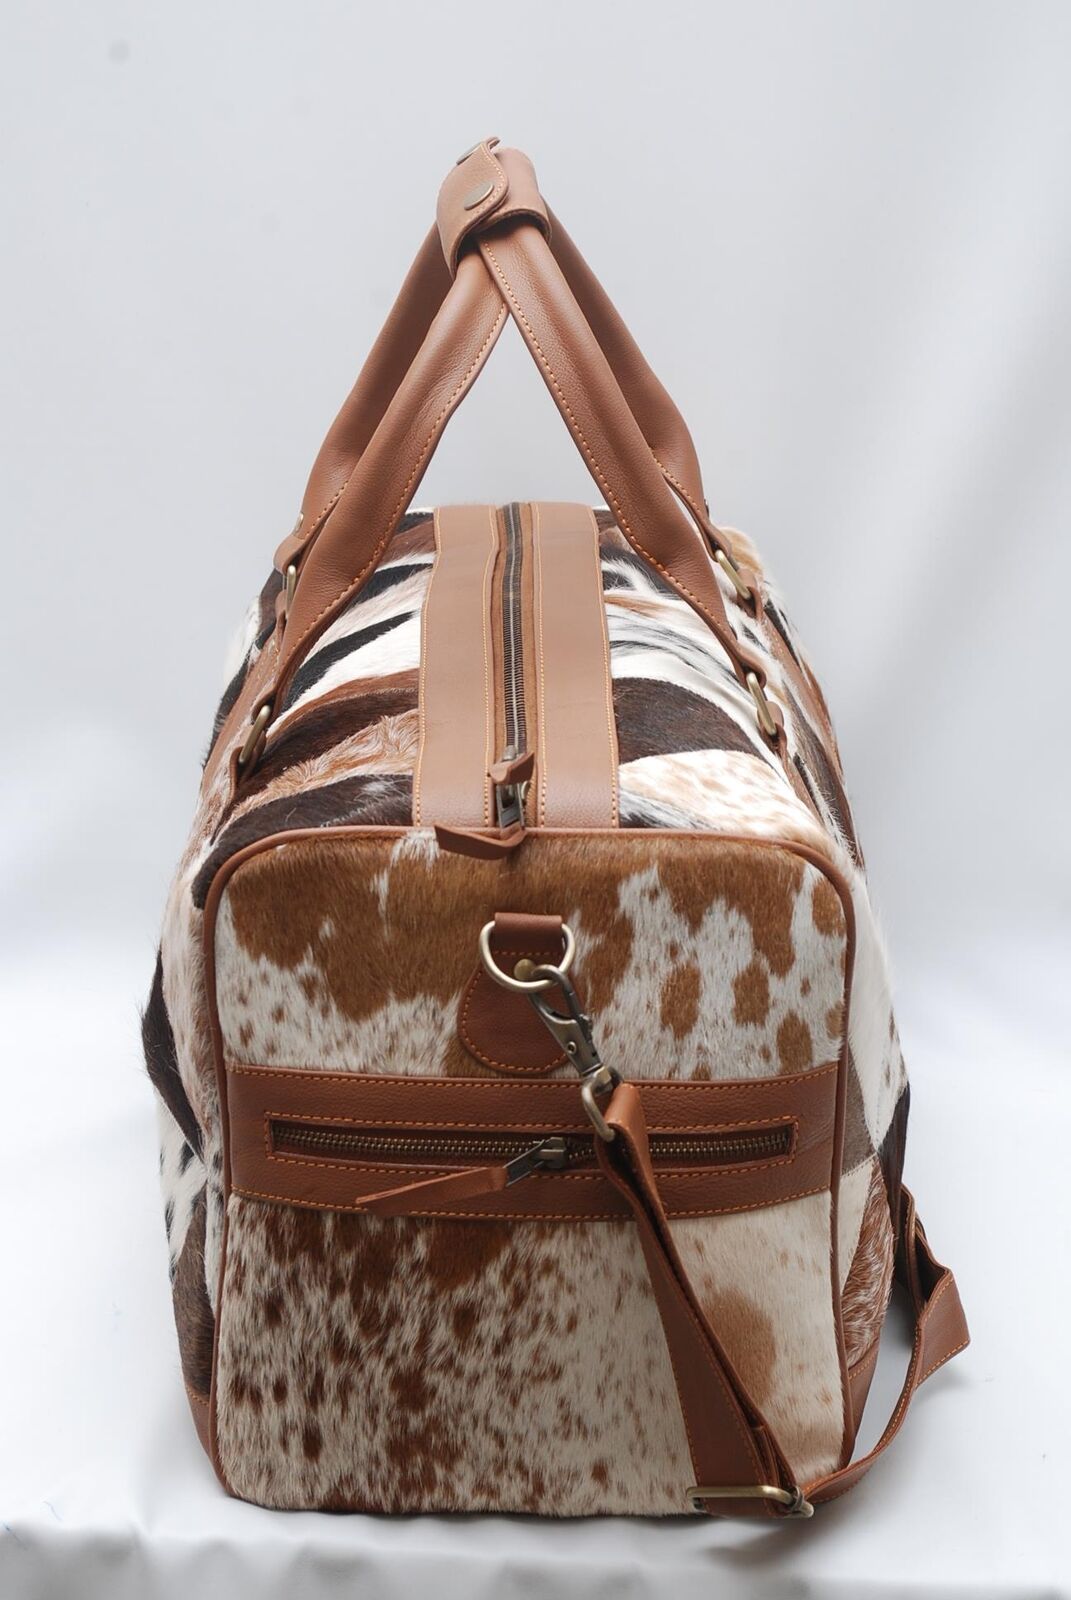 From urban adventures to countryside escapes, this cowhide duffle bag is your go-to companion for every journey.